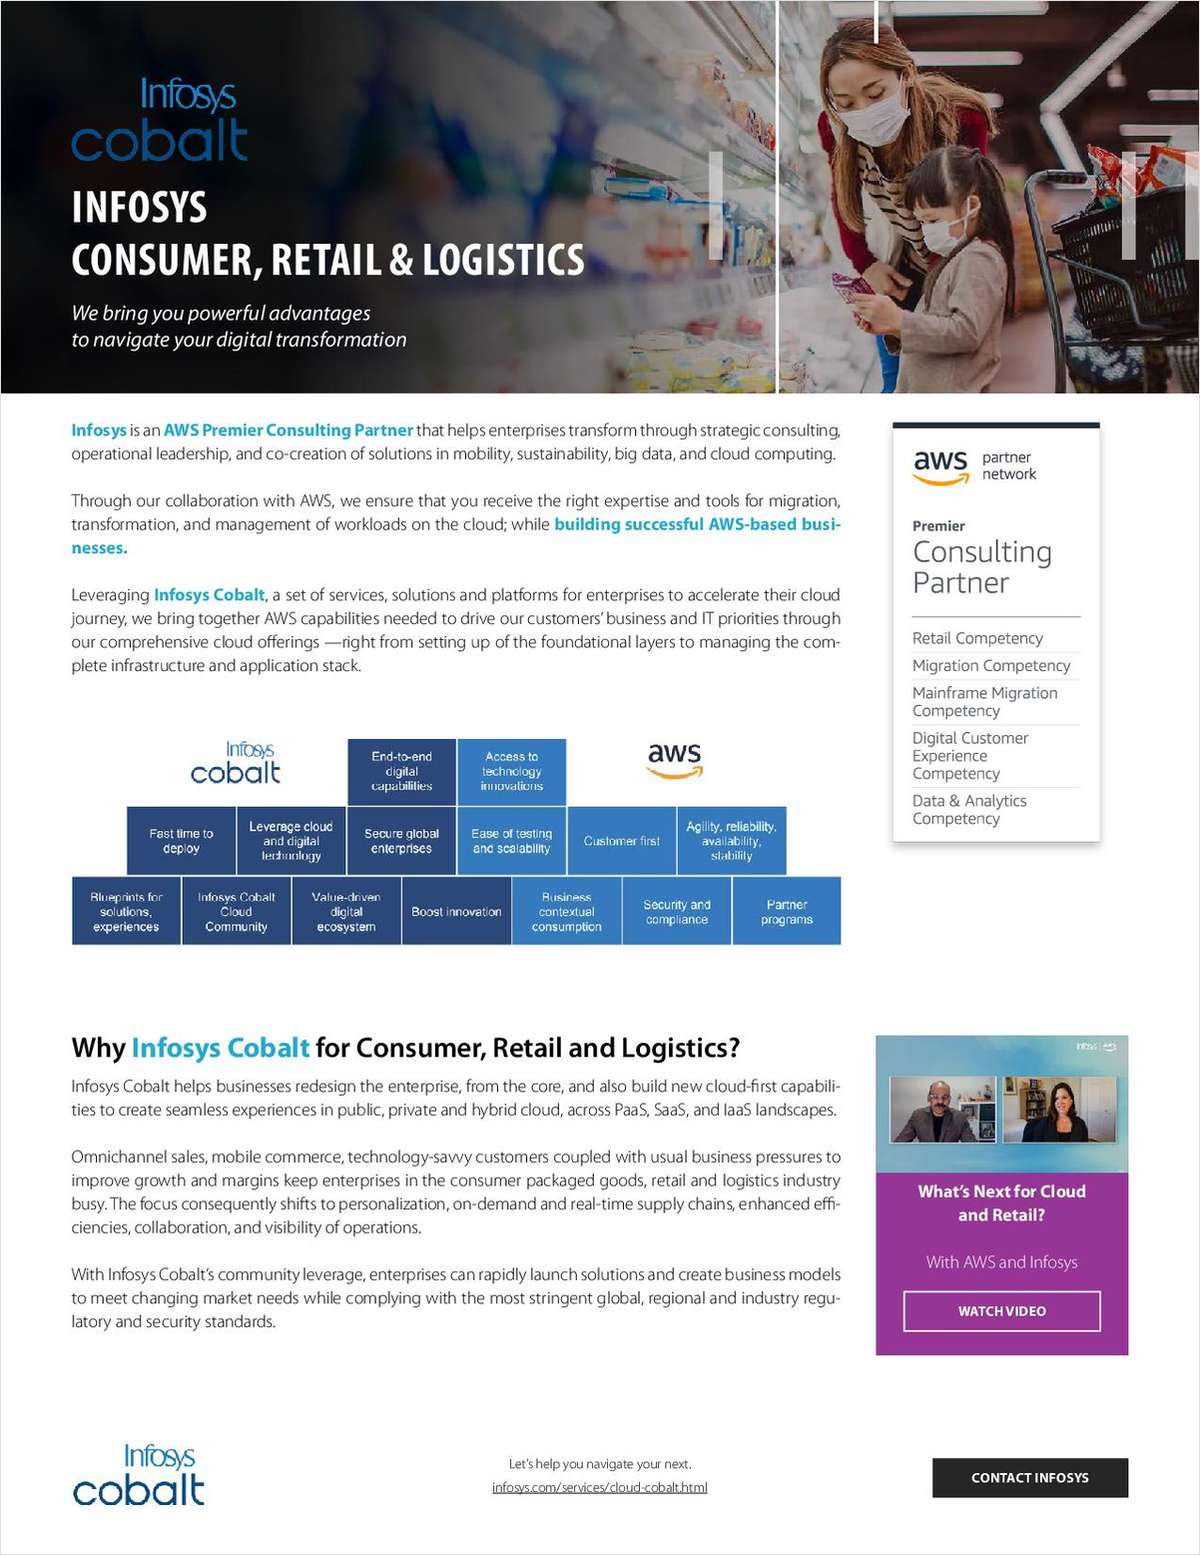 Why Infosys Cobalt for Consumer, Retail and Logistics?